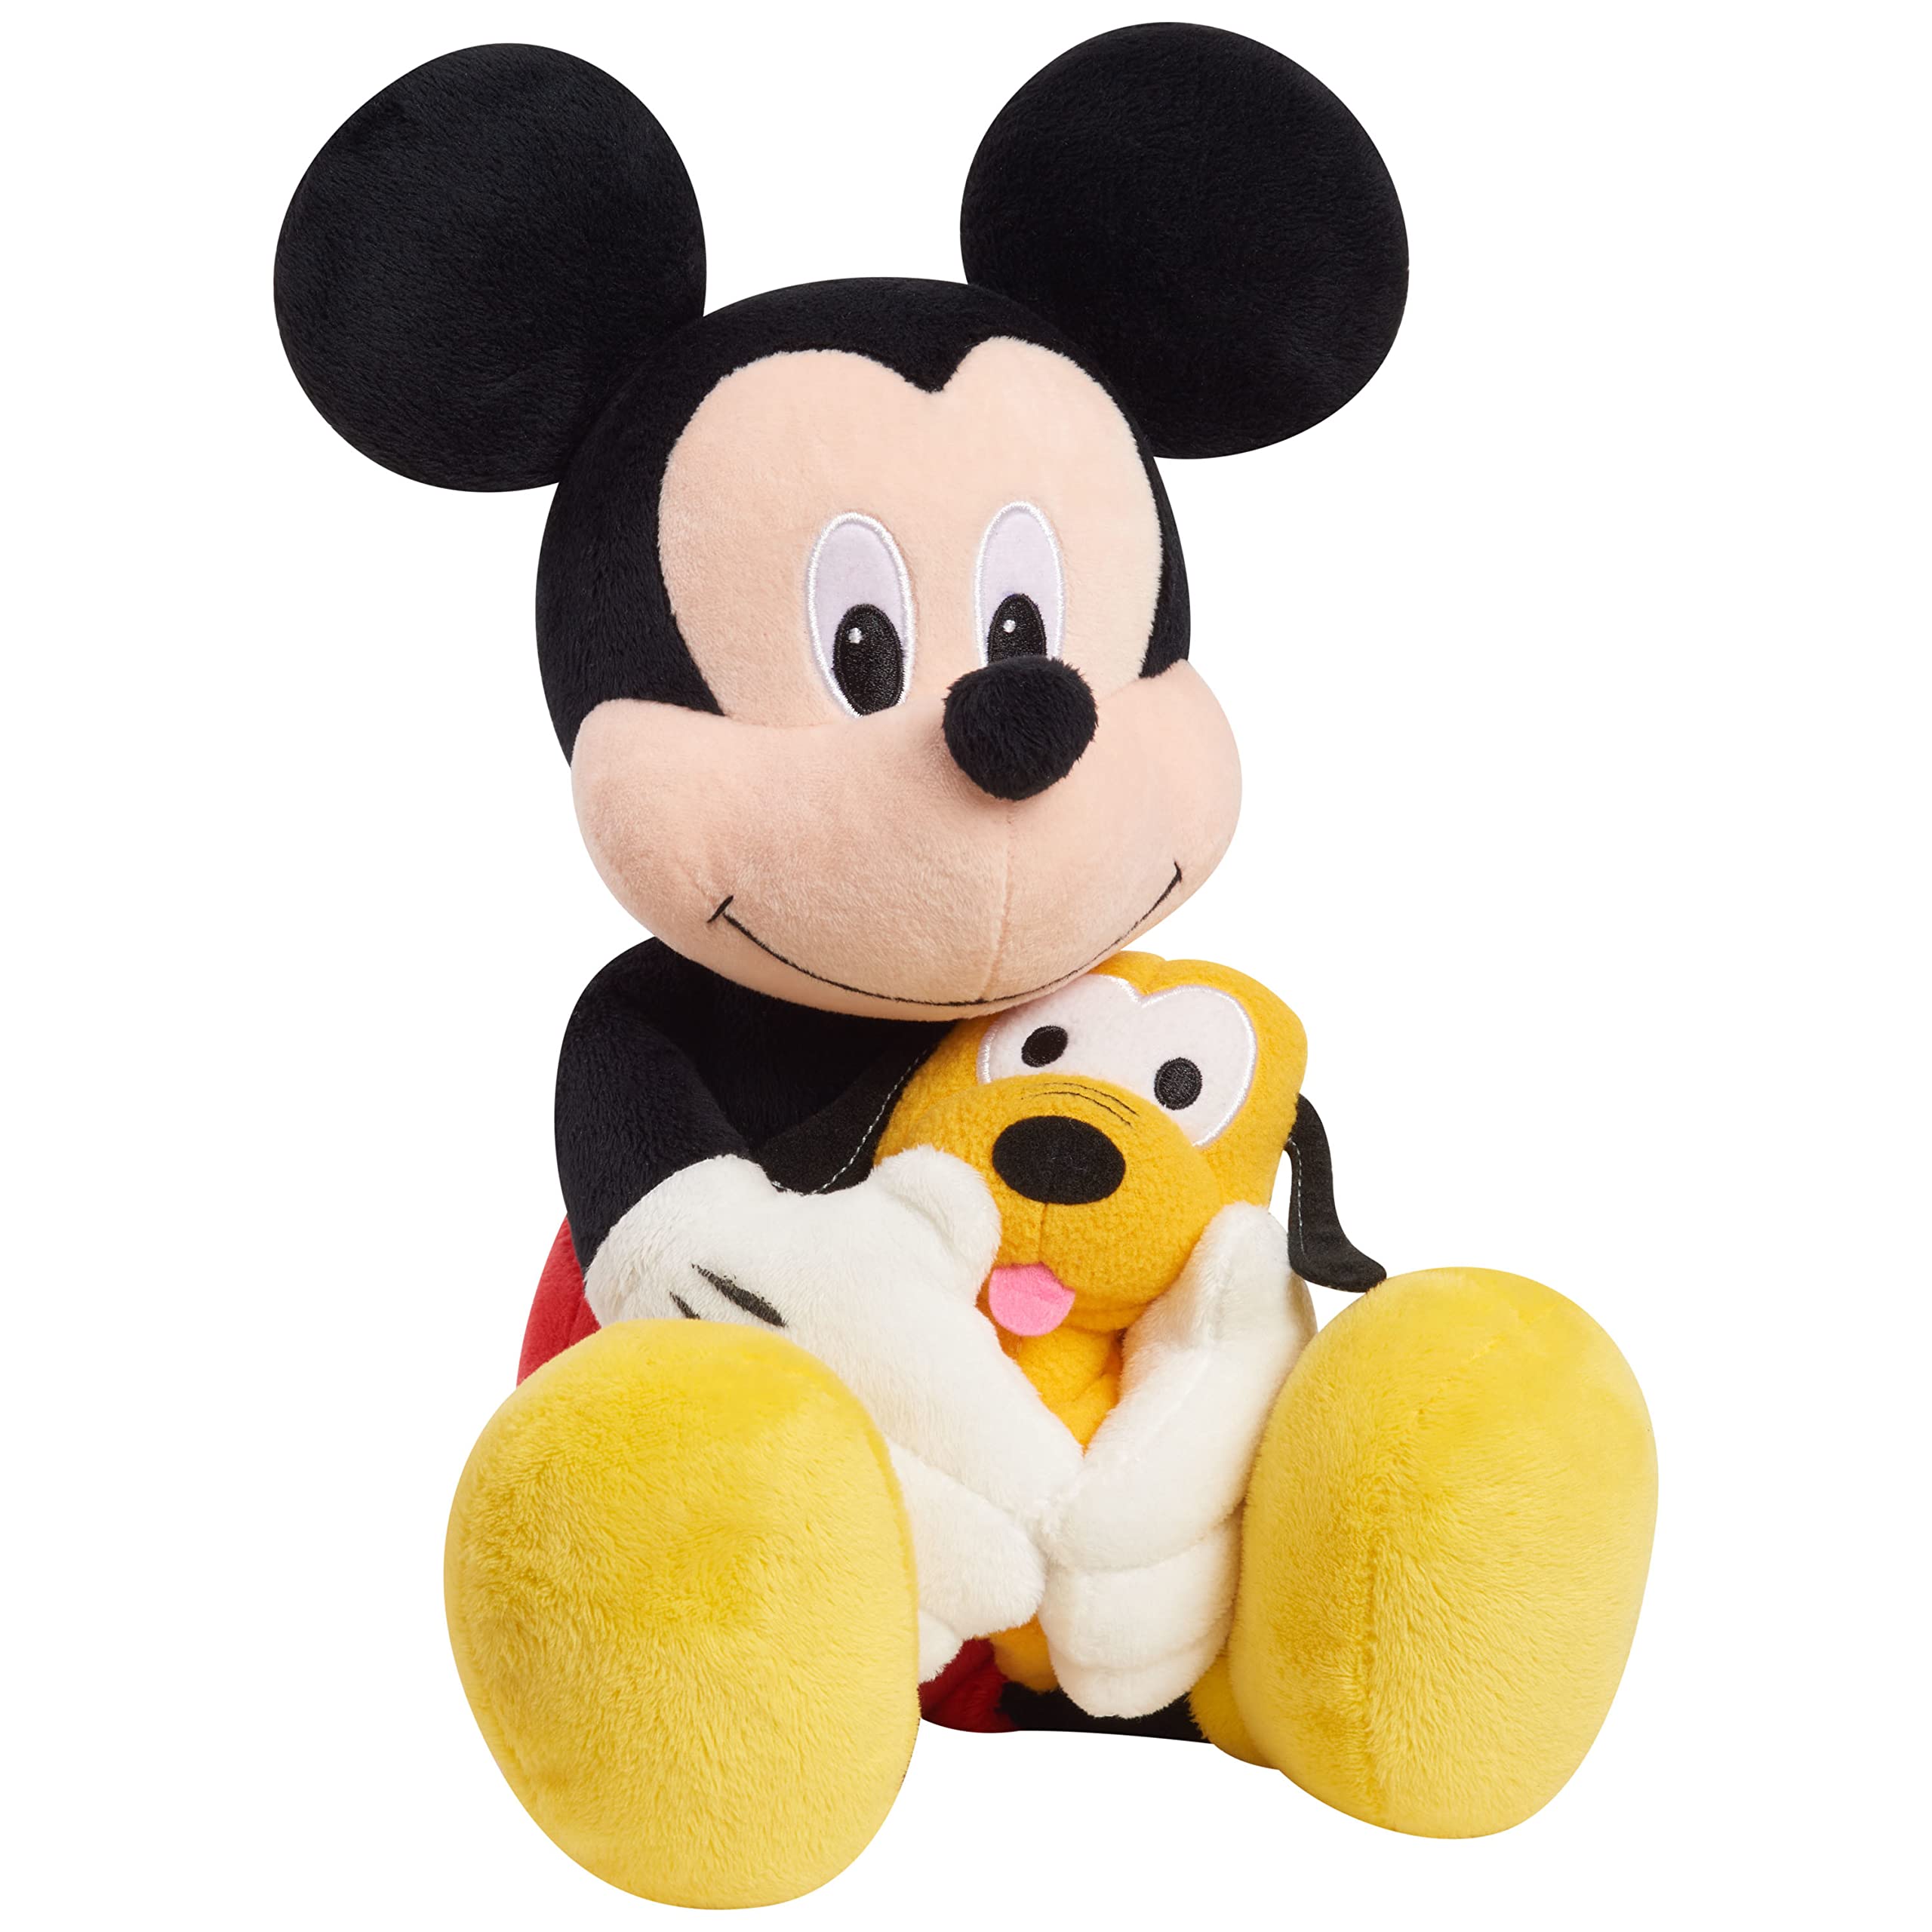 16" Just Play Lil Friends Disney Classic Mickey Mouse Plush w/ Attached Pluto $7.50 + Free Shipping w/ Prime or on orders over $35